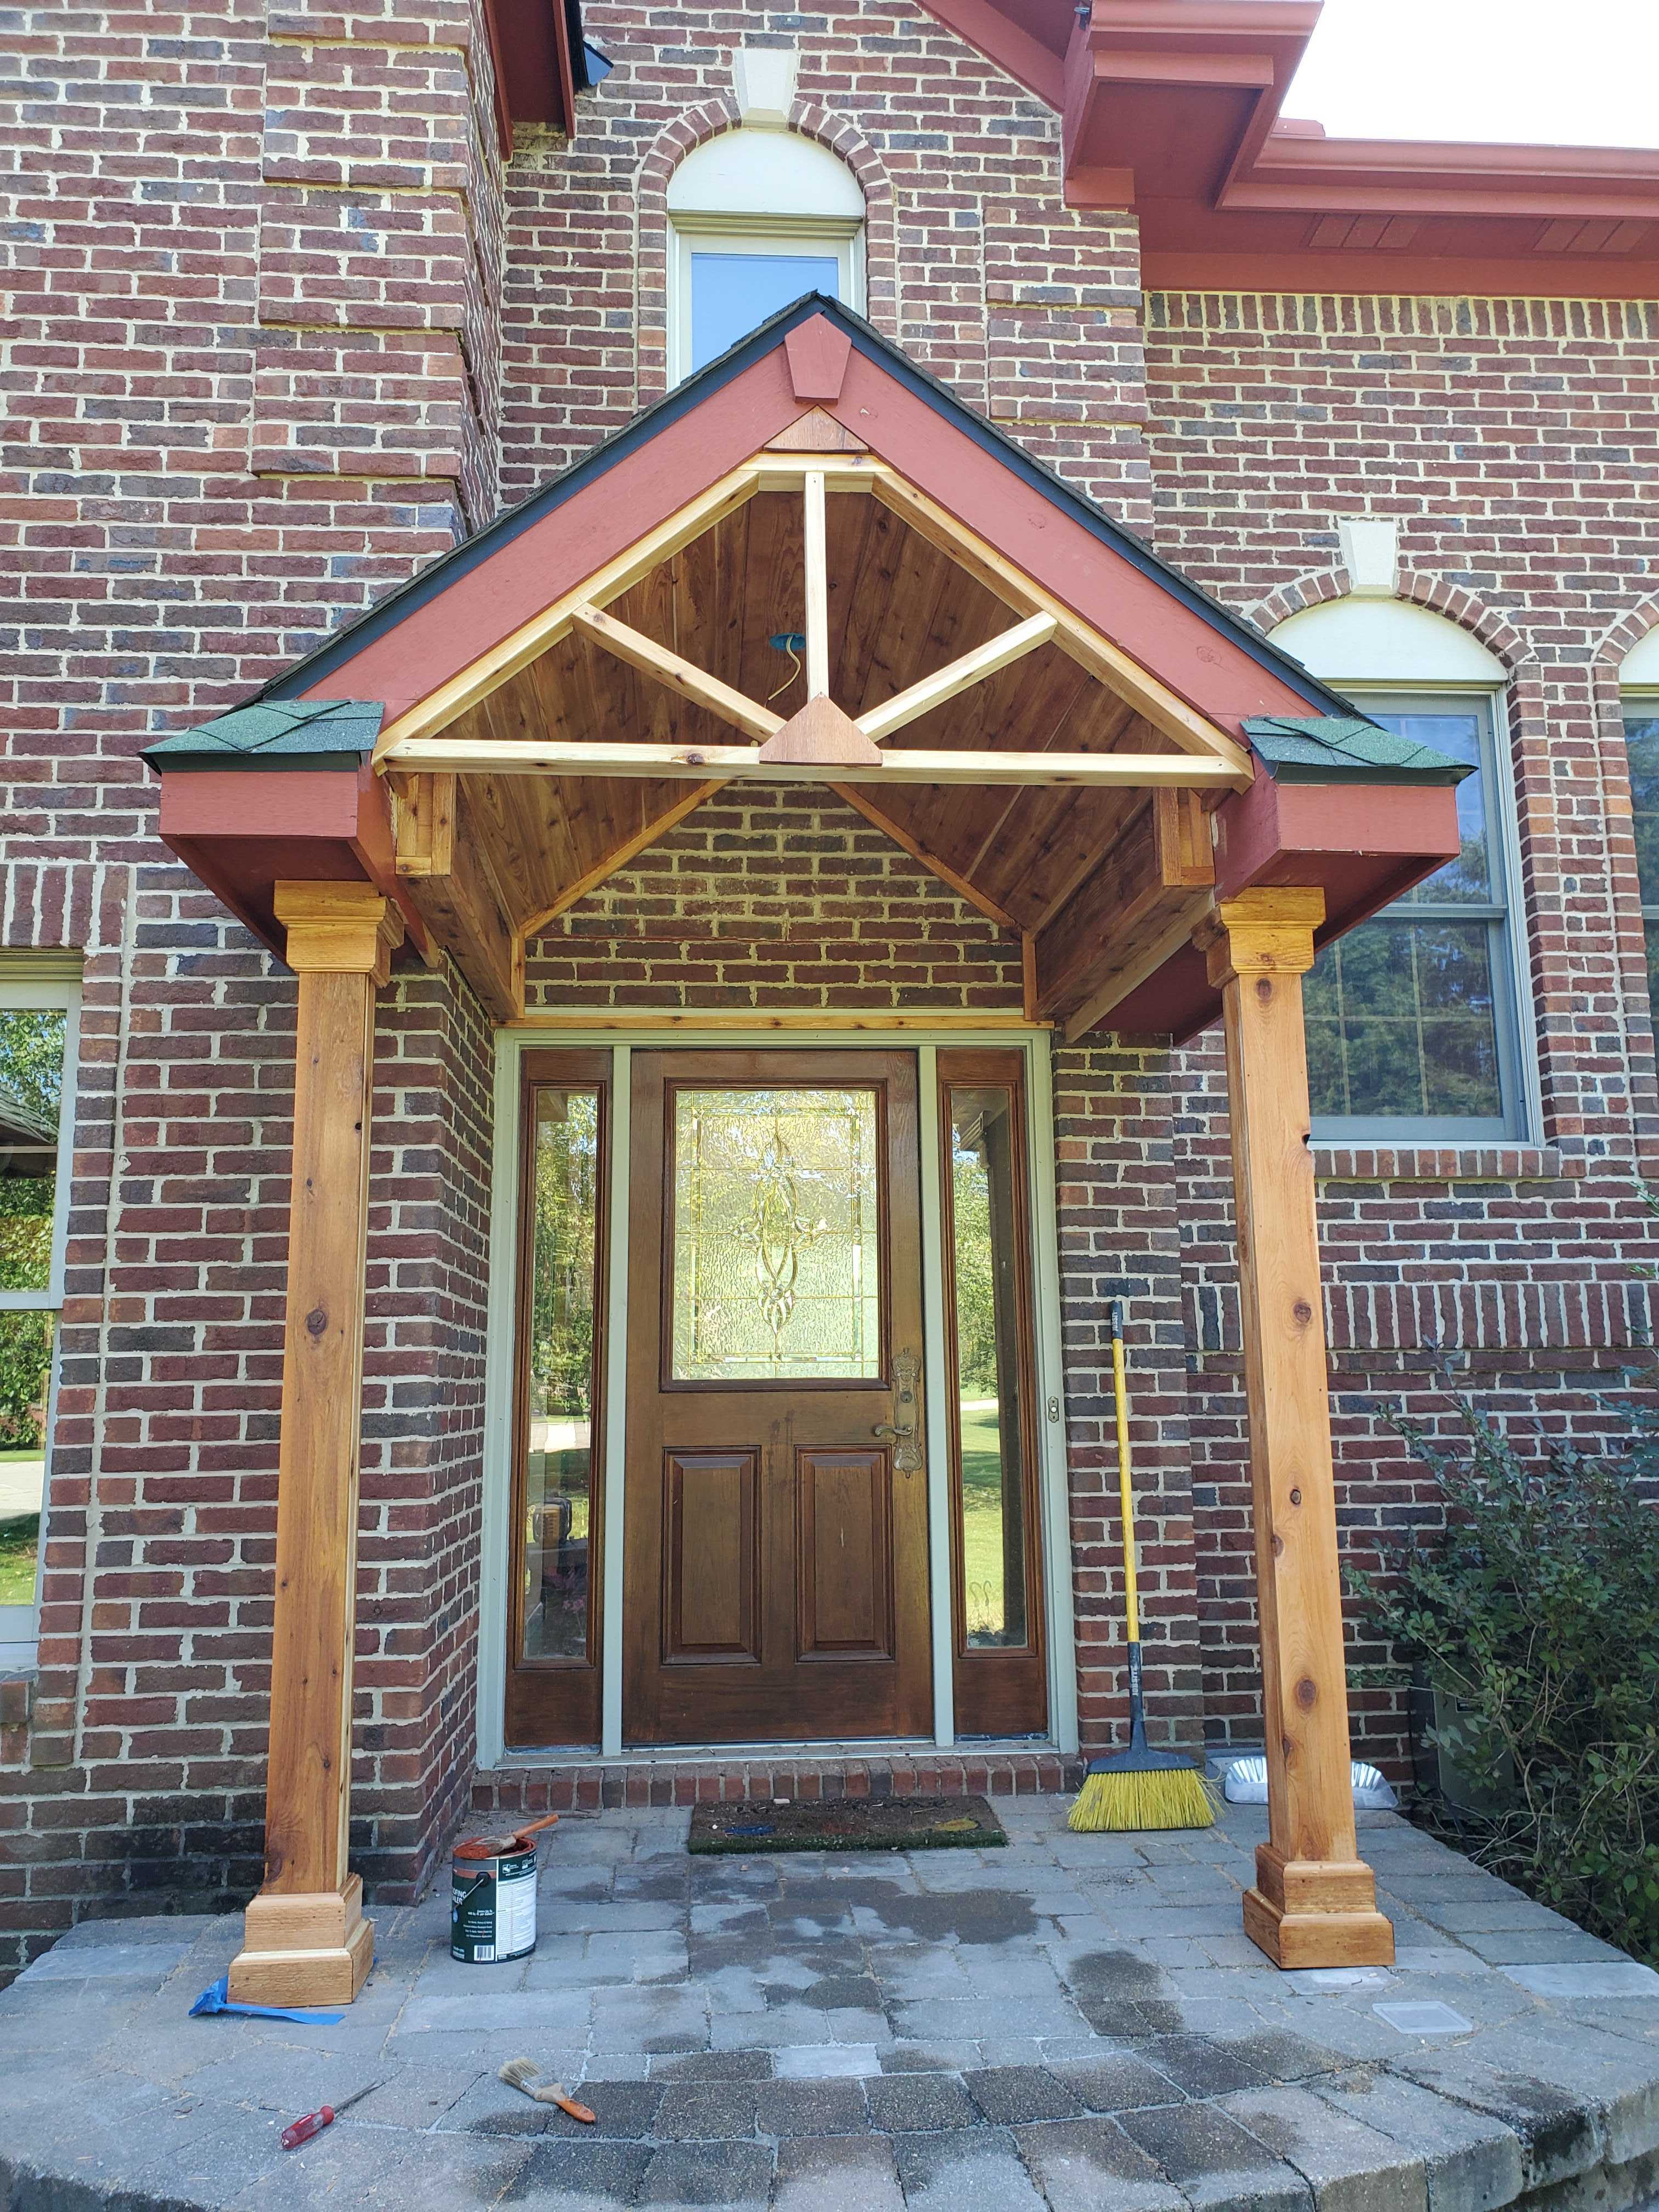 A custom awning on the porch of a brick house.